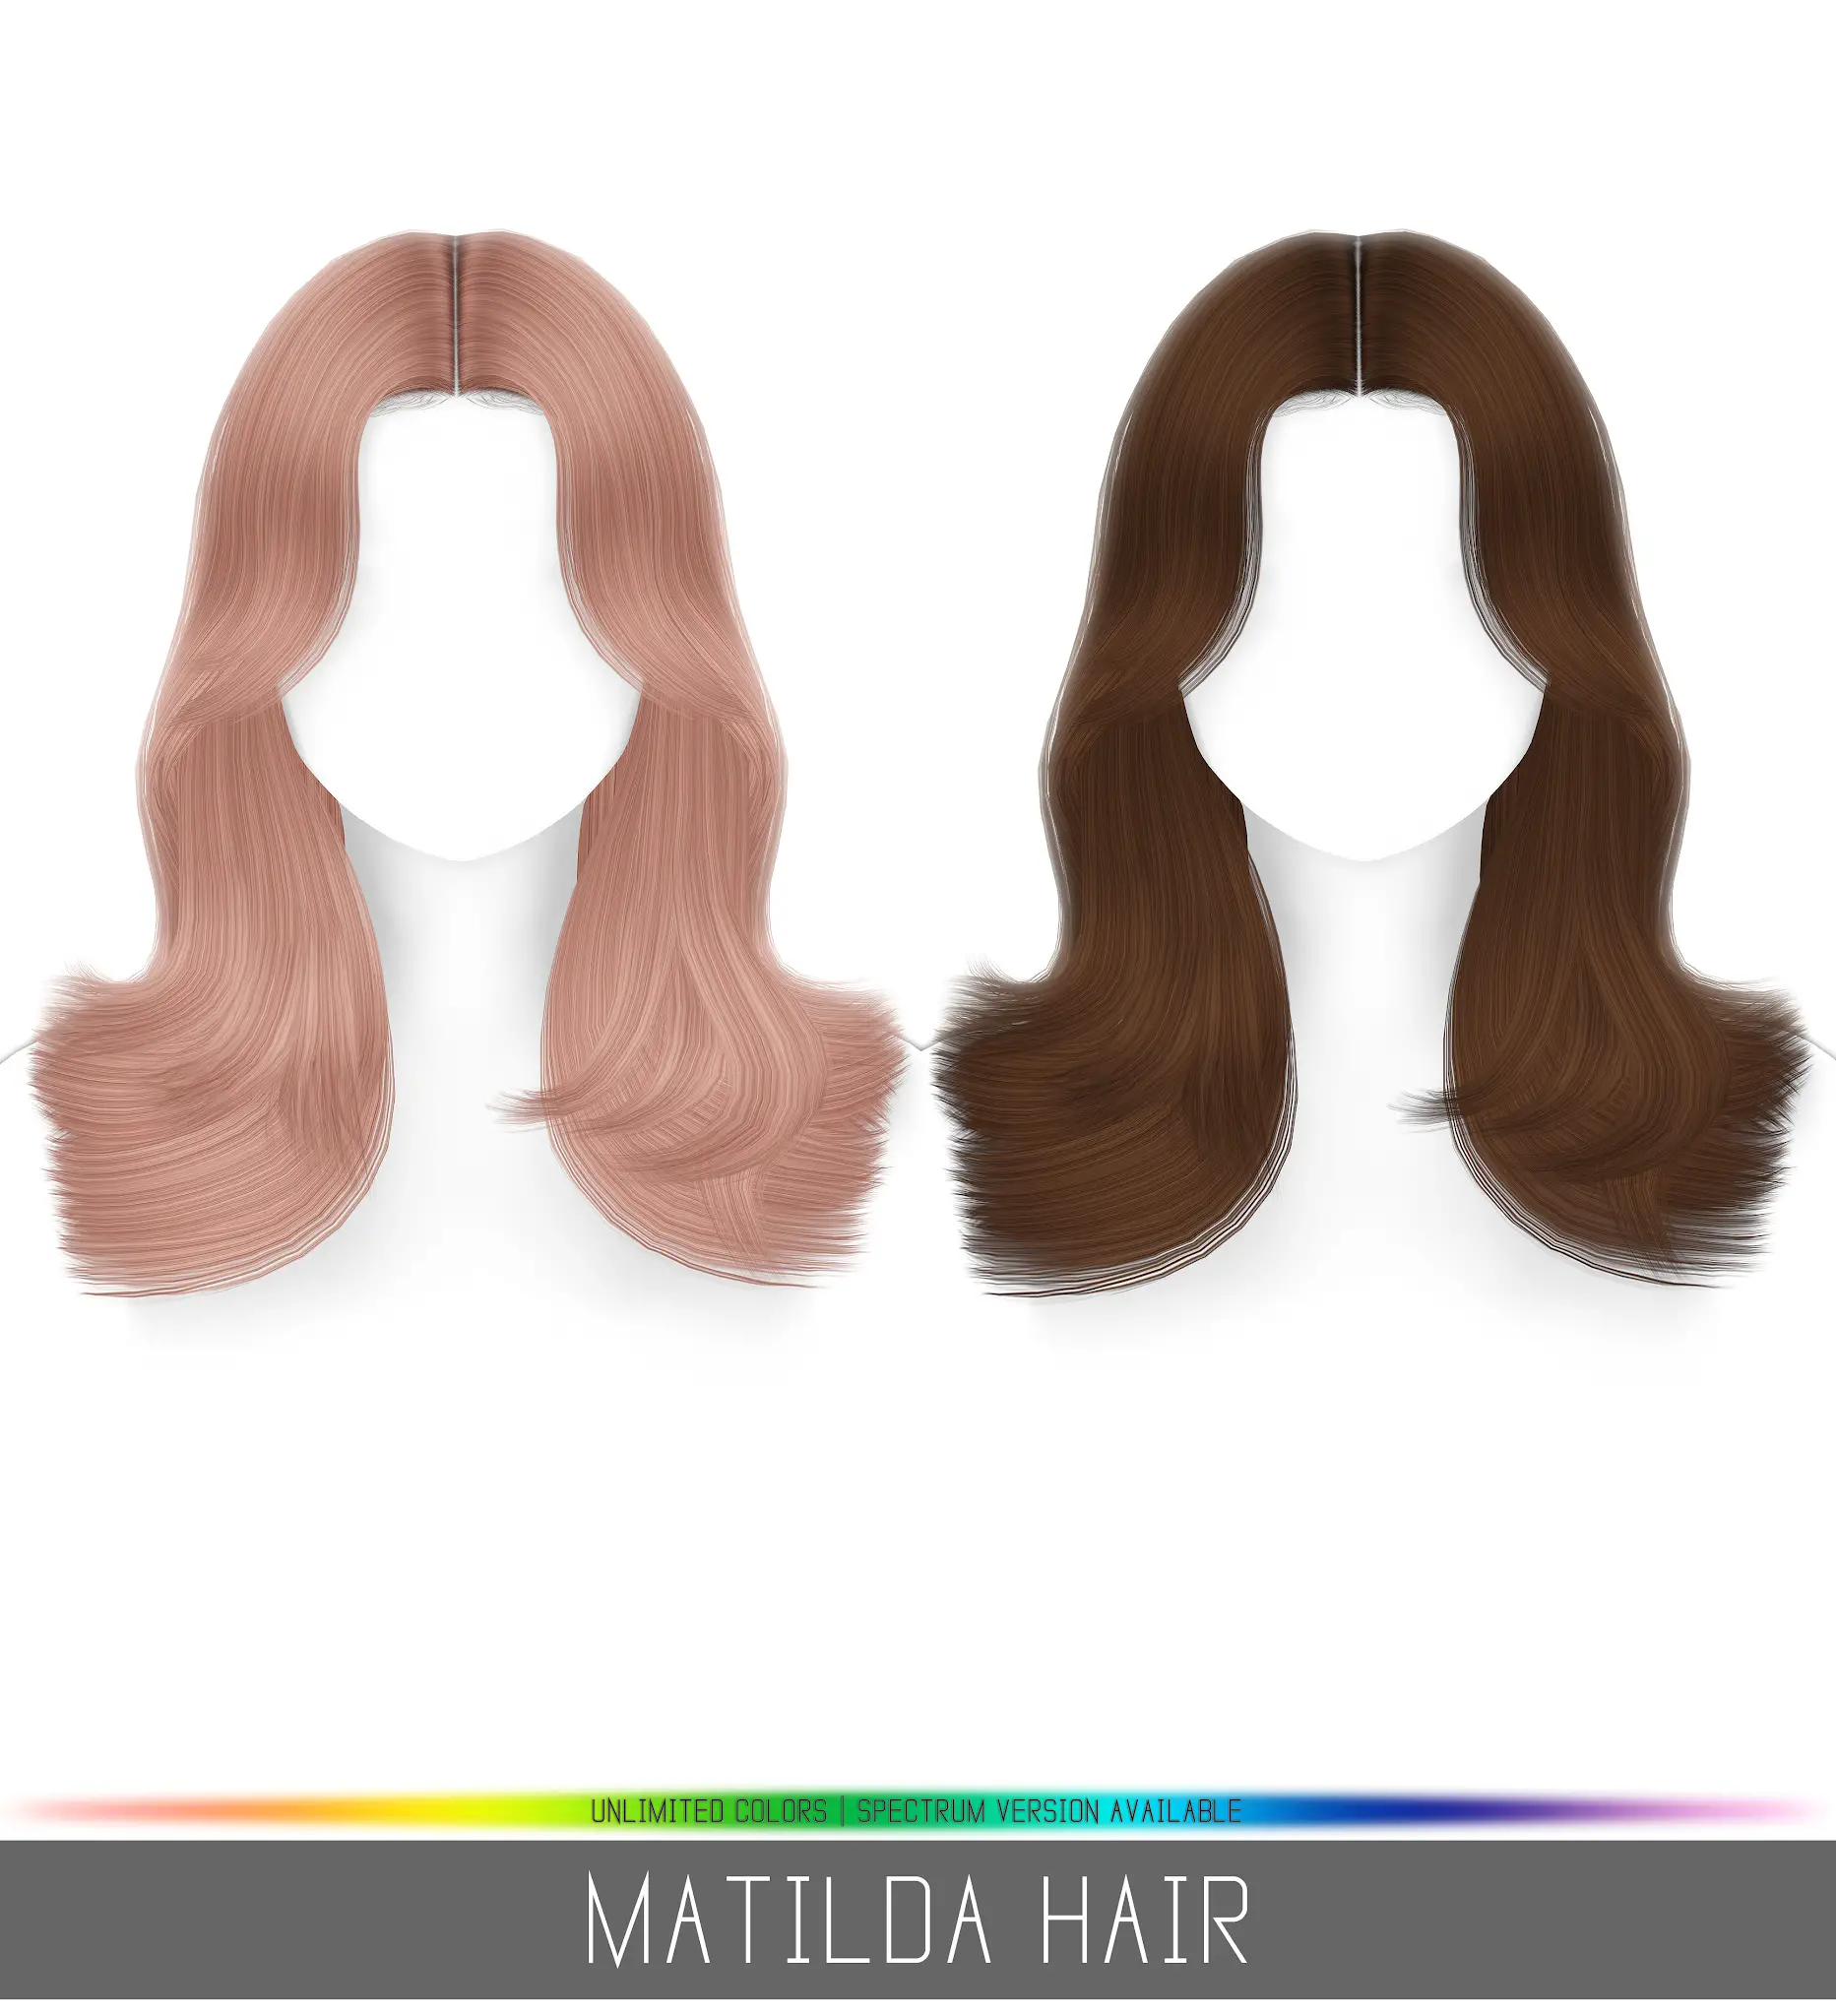 Simpliciaty Melody Hair Retexture At Frost Sims 4 Sims 4 Updates Images